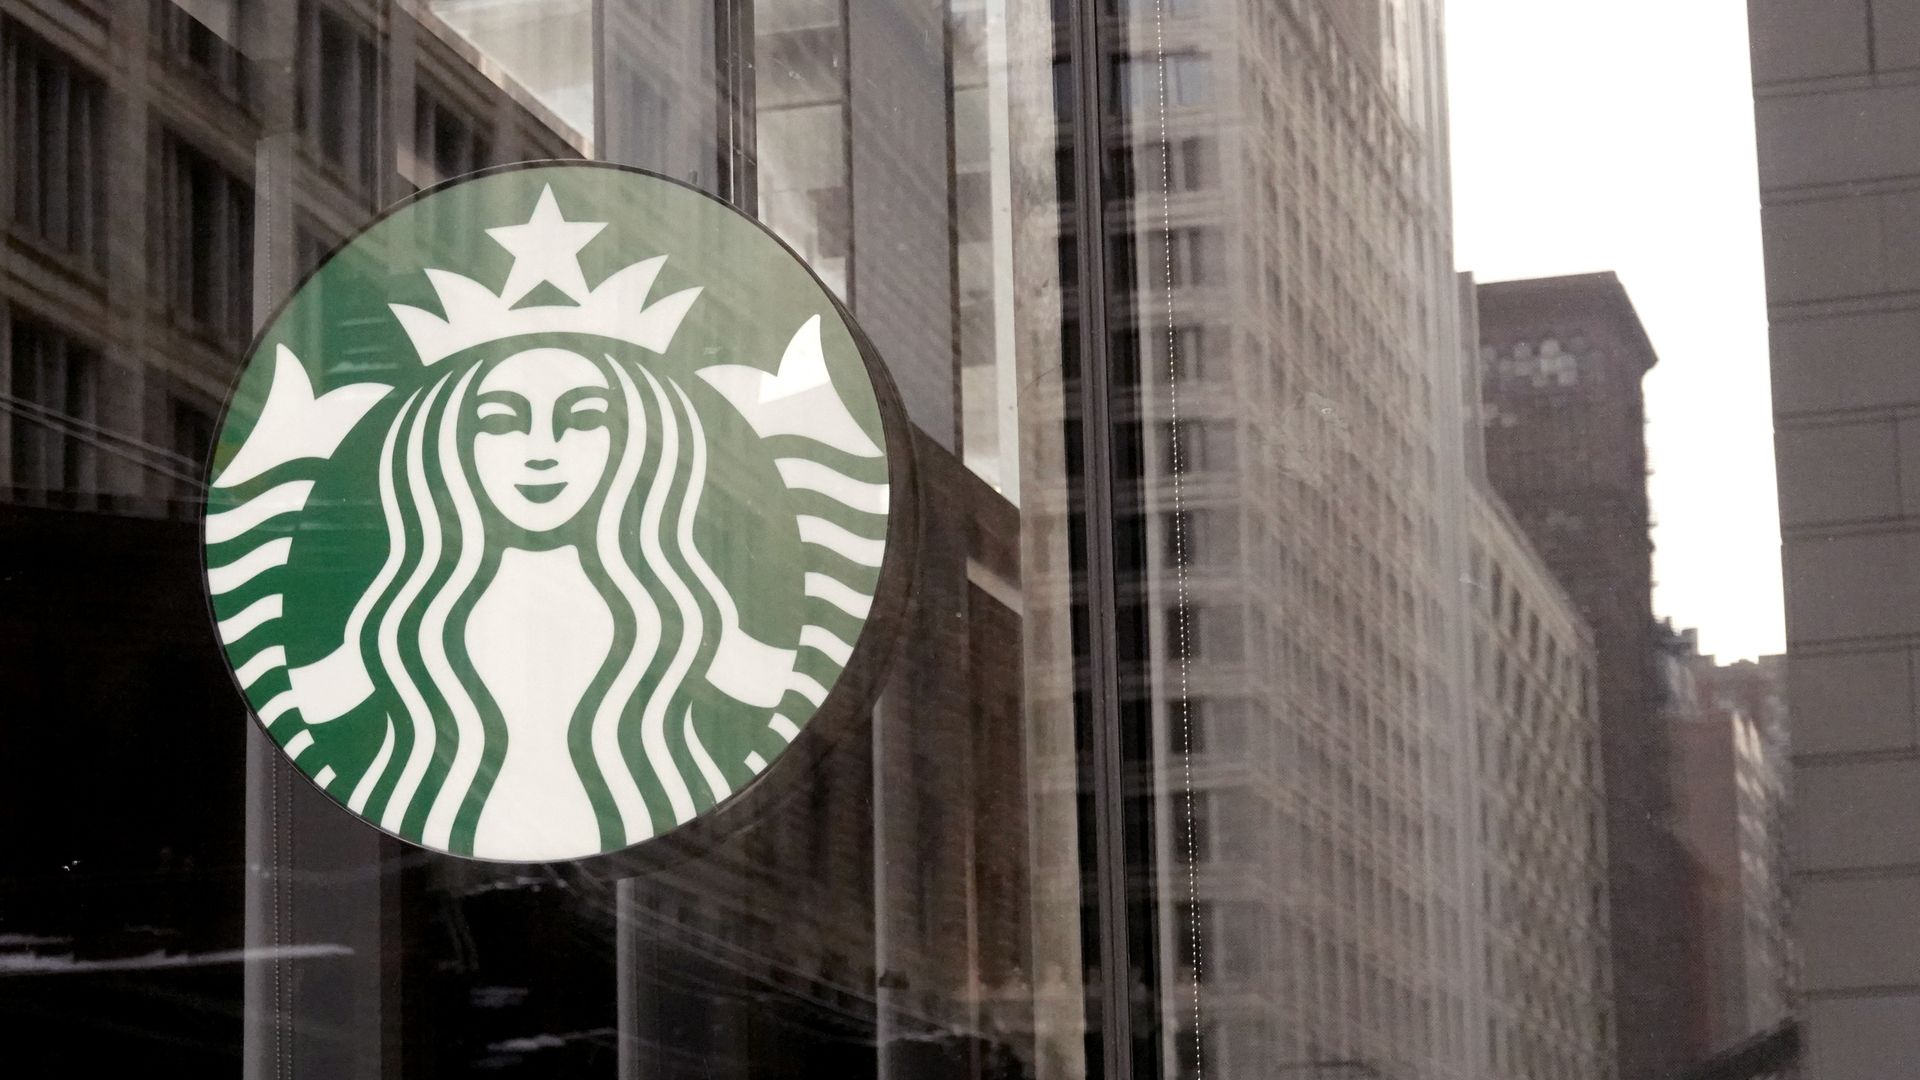 Photo of a Starbucks logo mounted on the exterior of a glass skyscraper